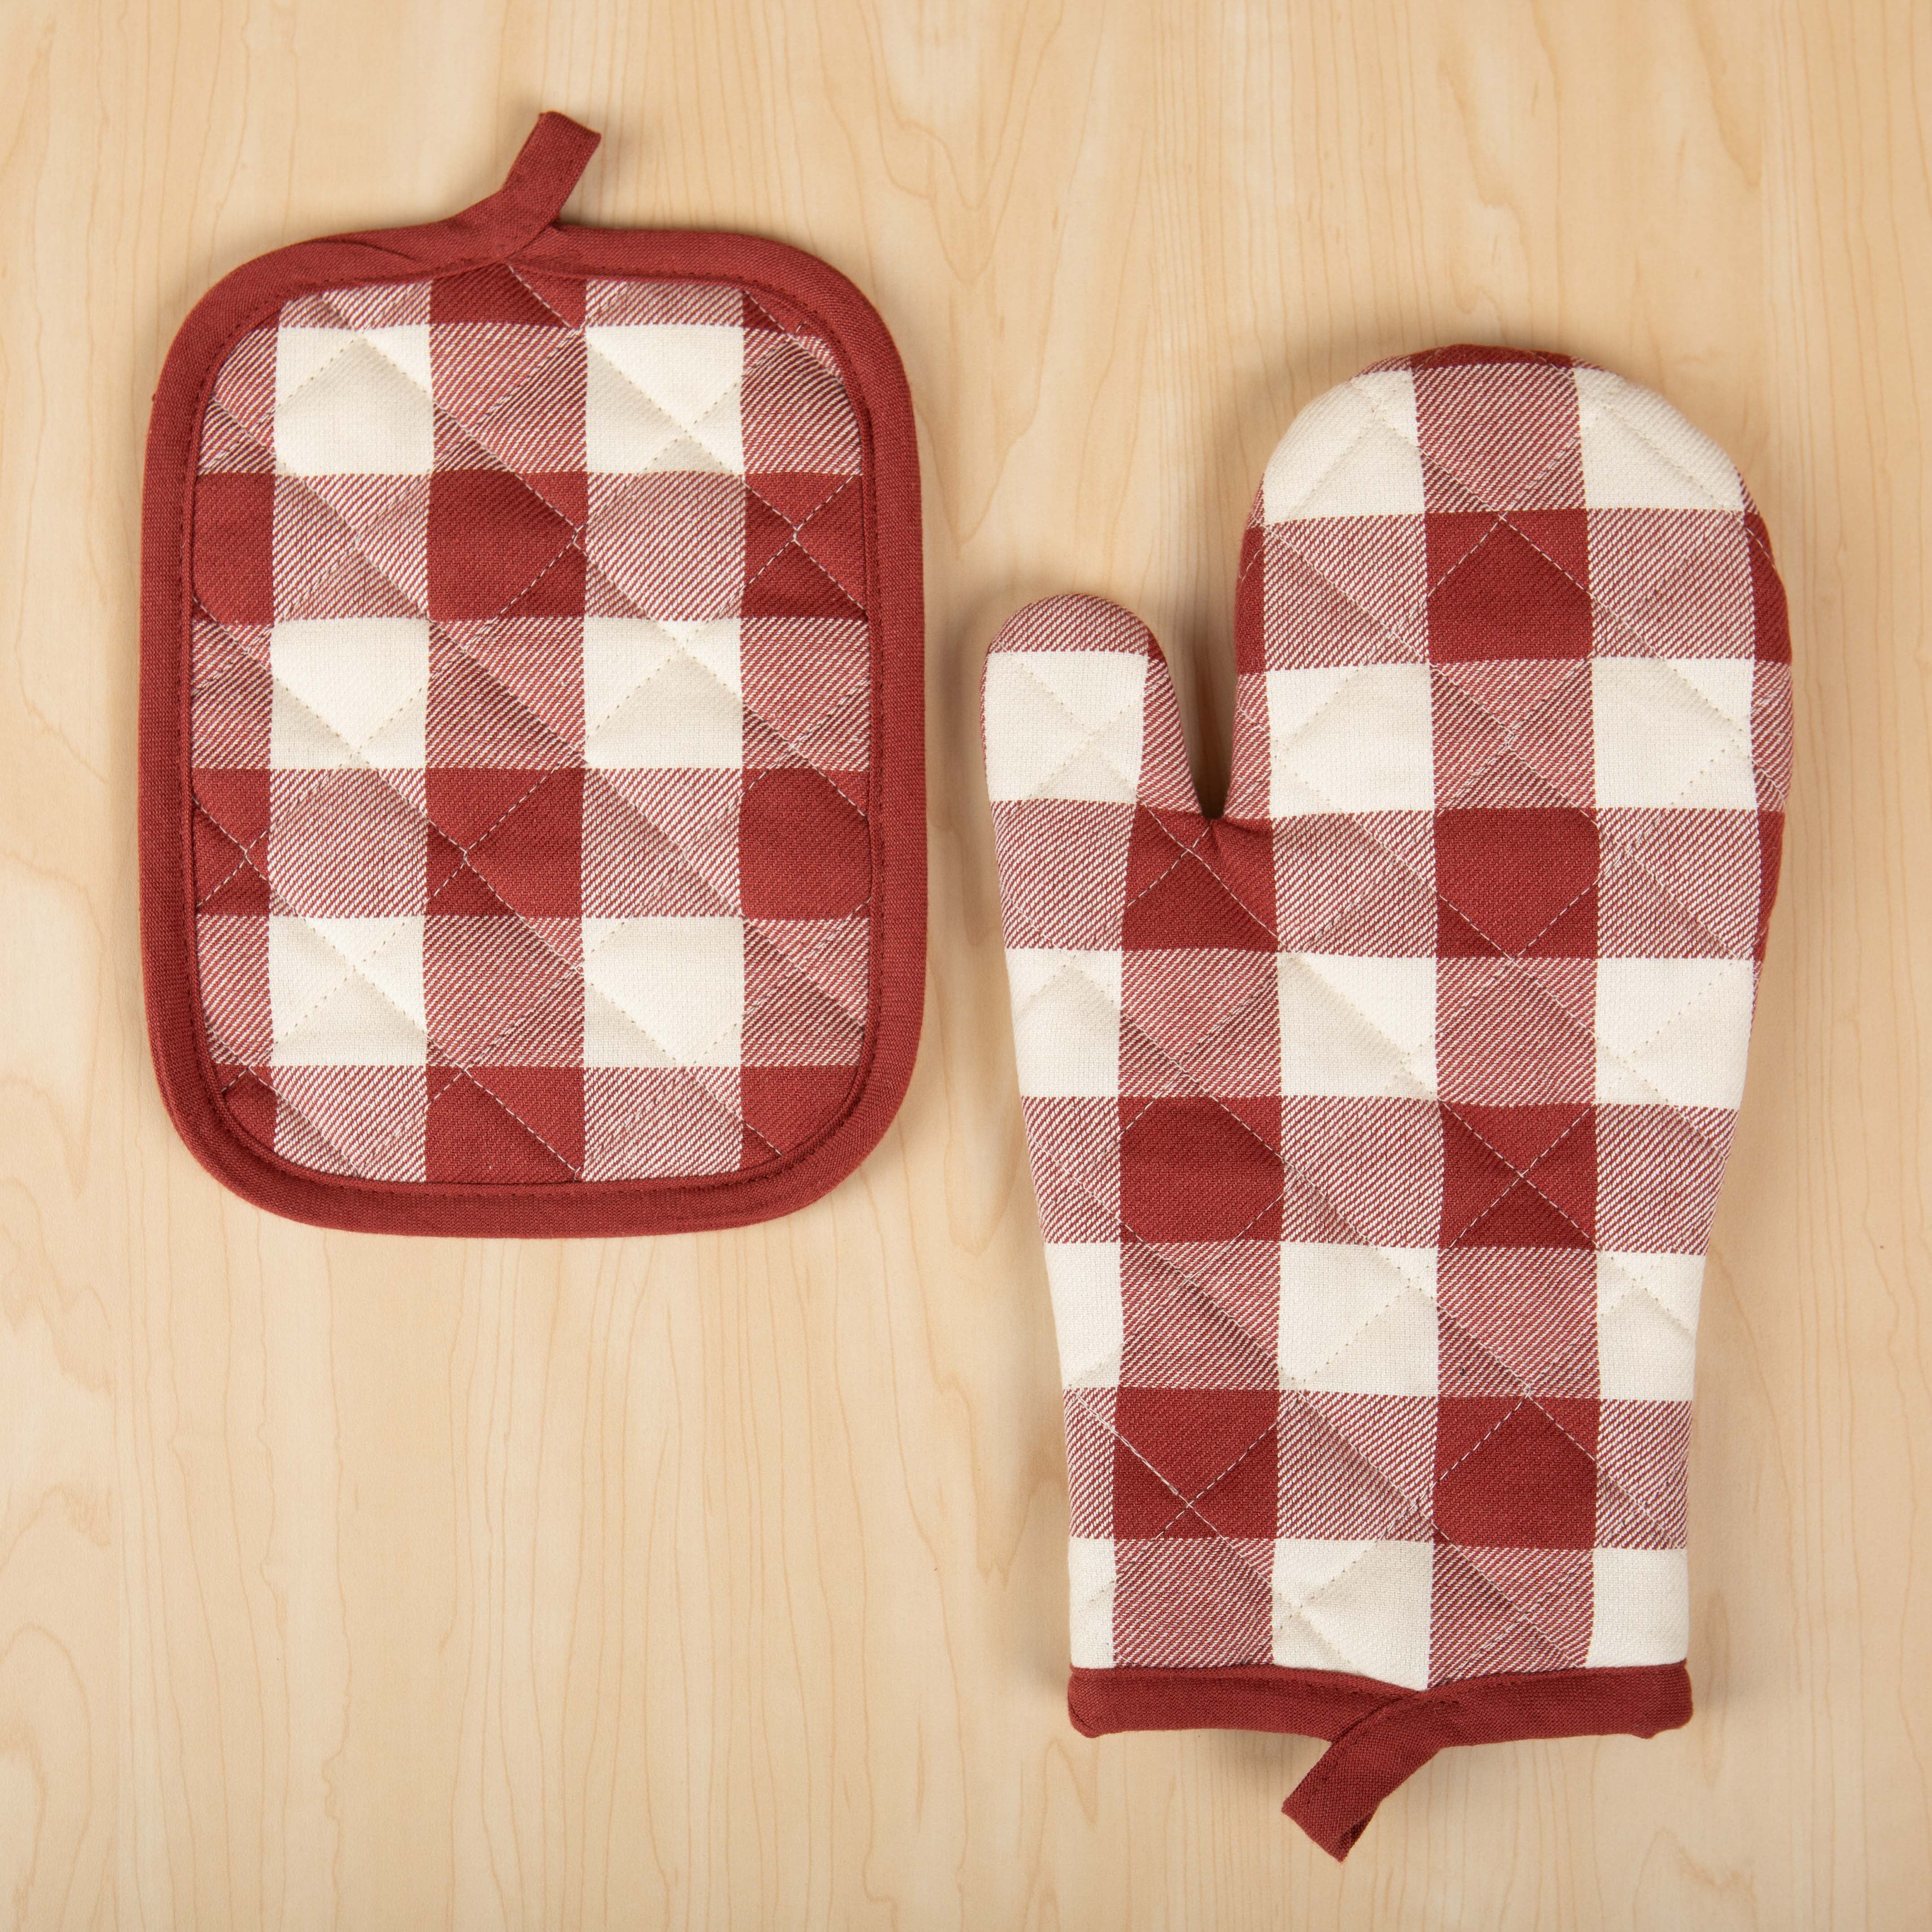 5pc Kitchen Set Happiness is Homemade Red Grey Pot Holders Towels Oven Mitt